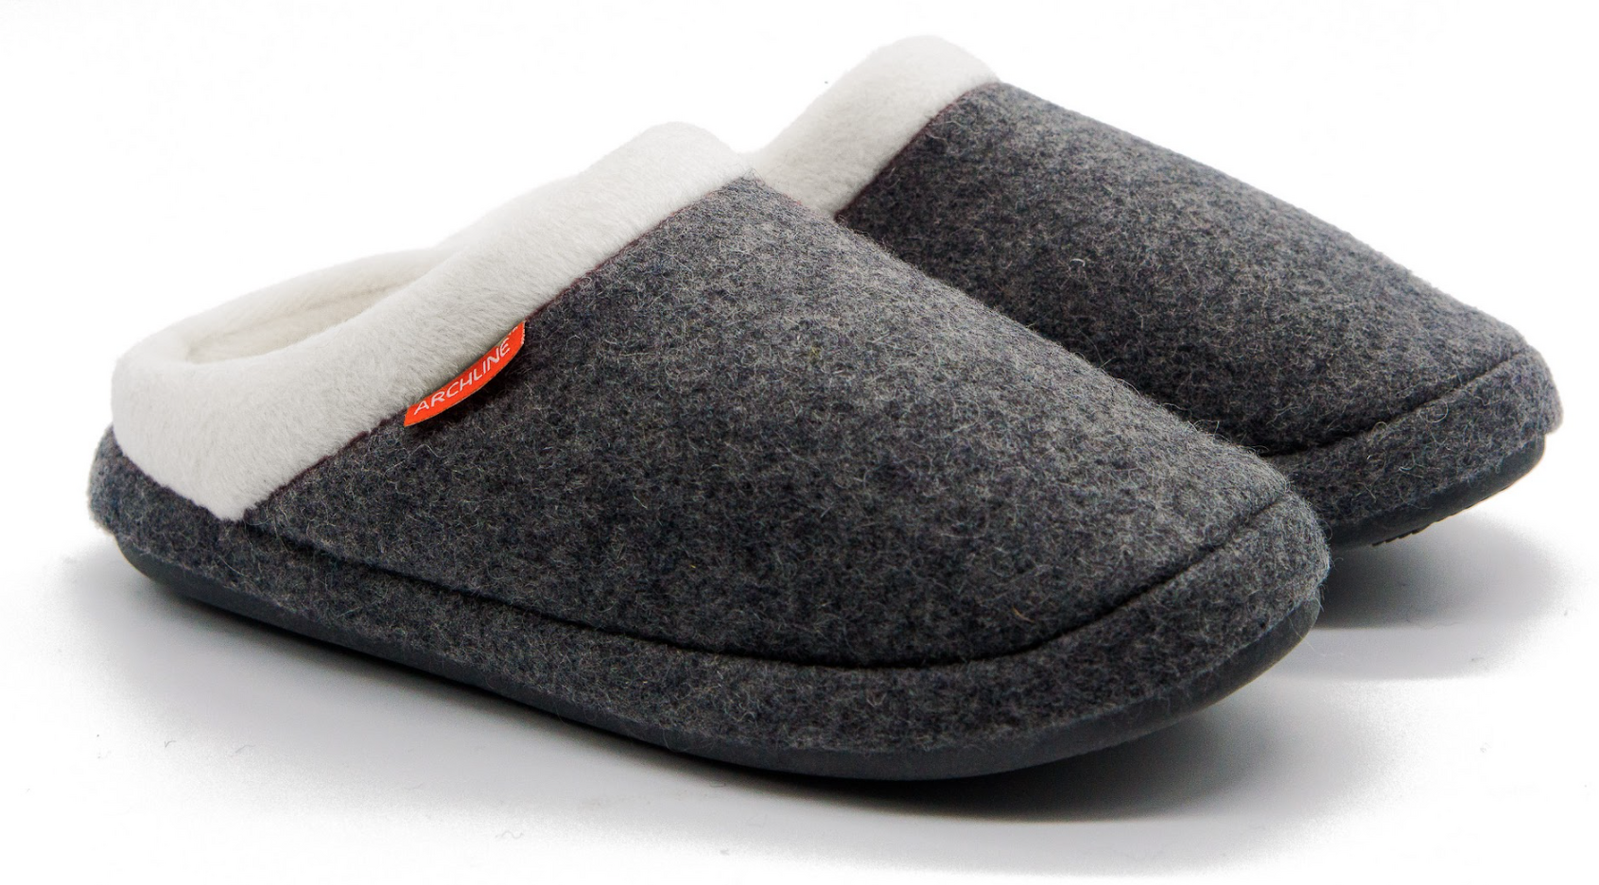 Orthotic Slippers Slip On Arch Scuffs Orthopedic Moccasins - Grey Marle - EUR 37